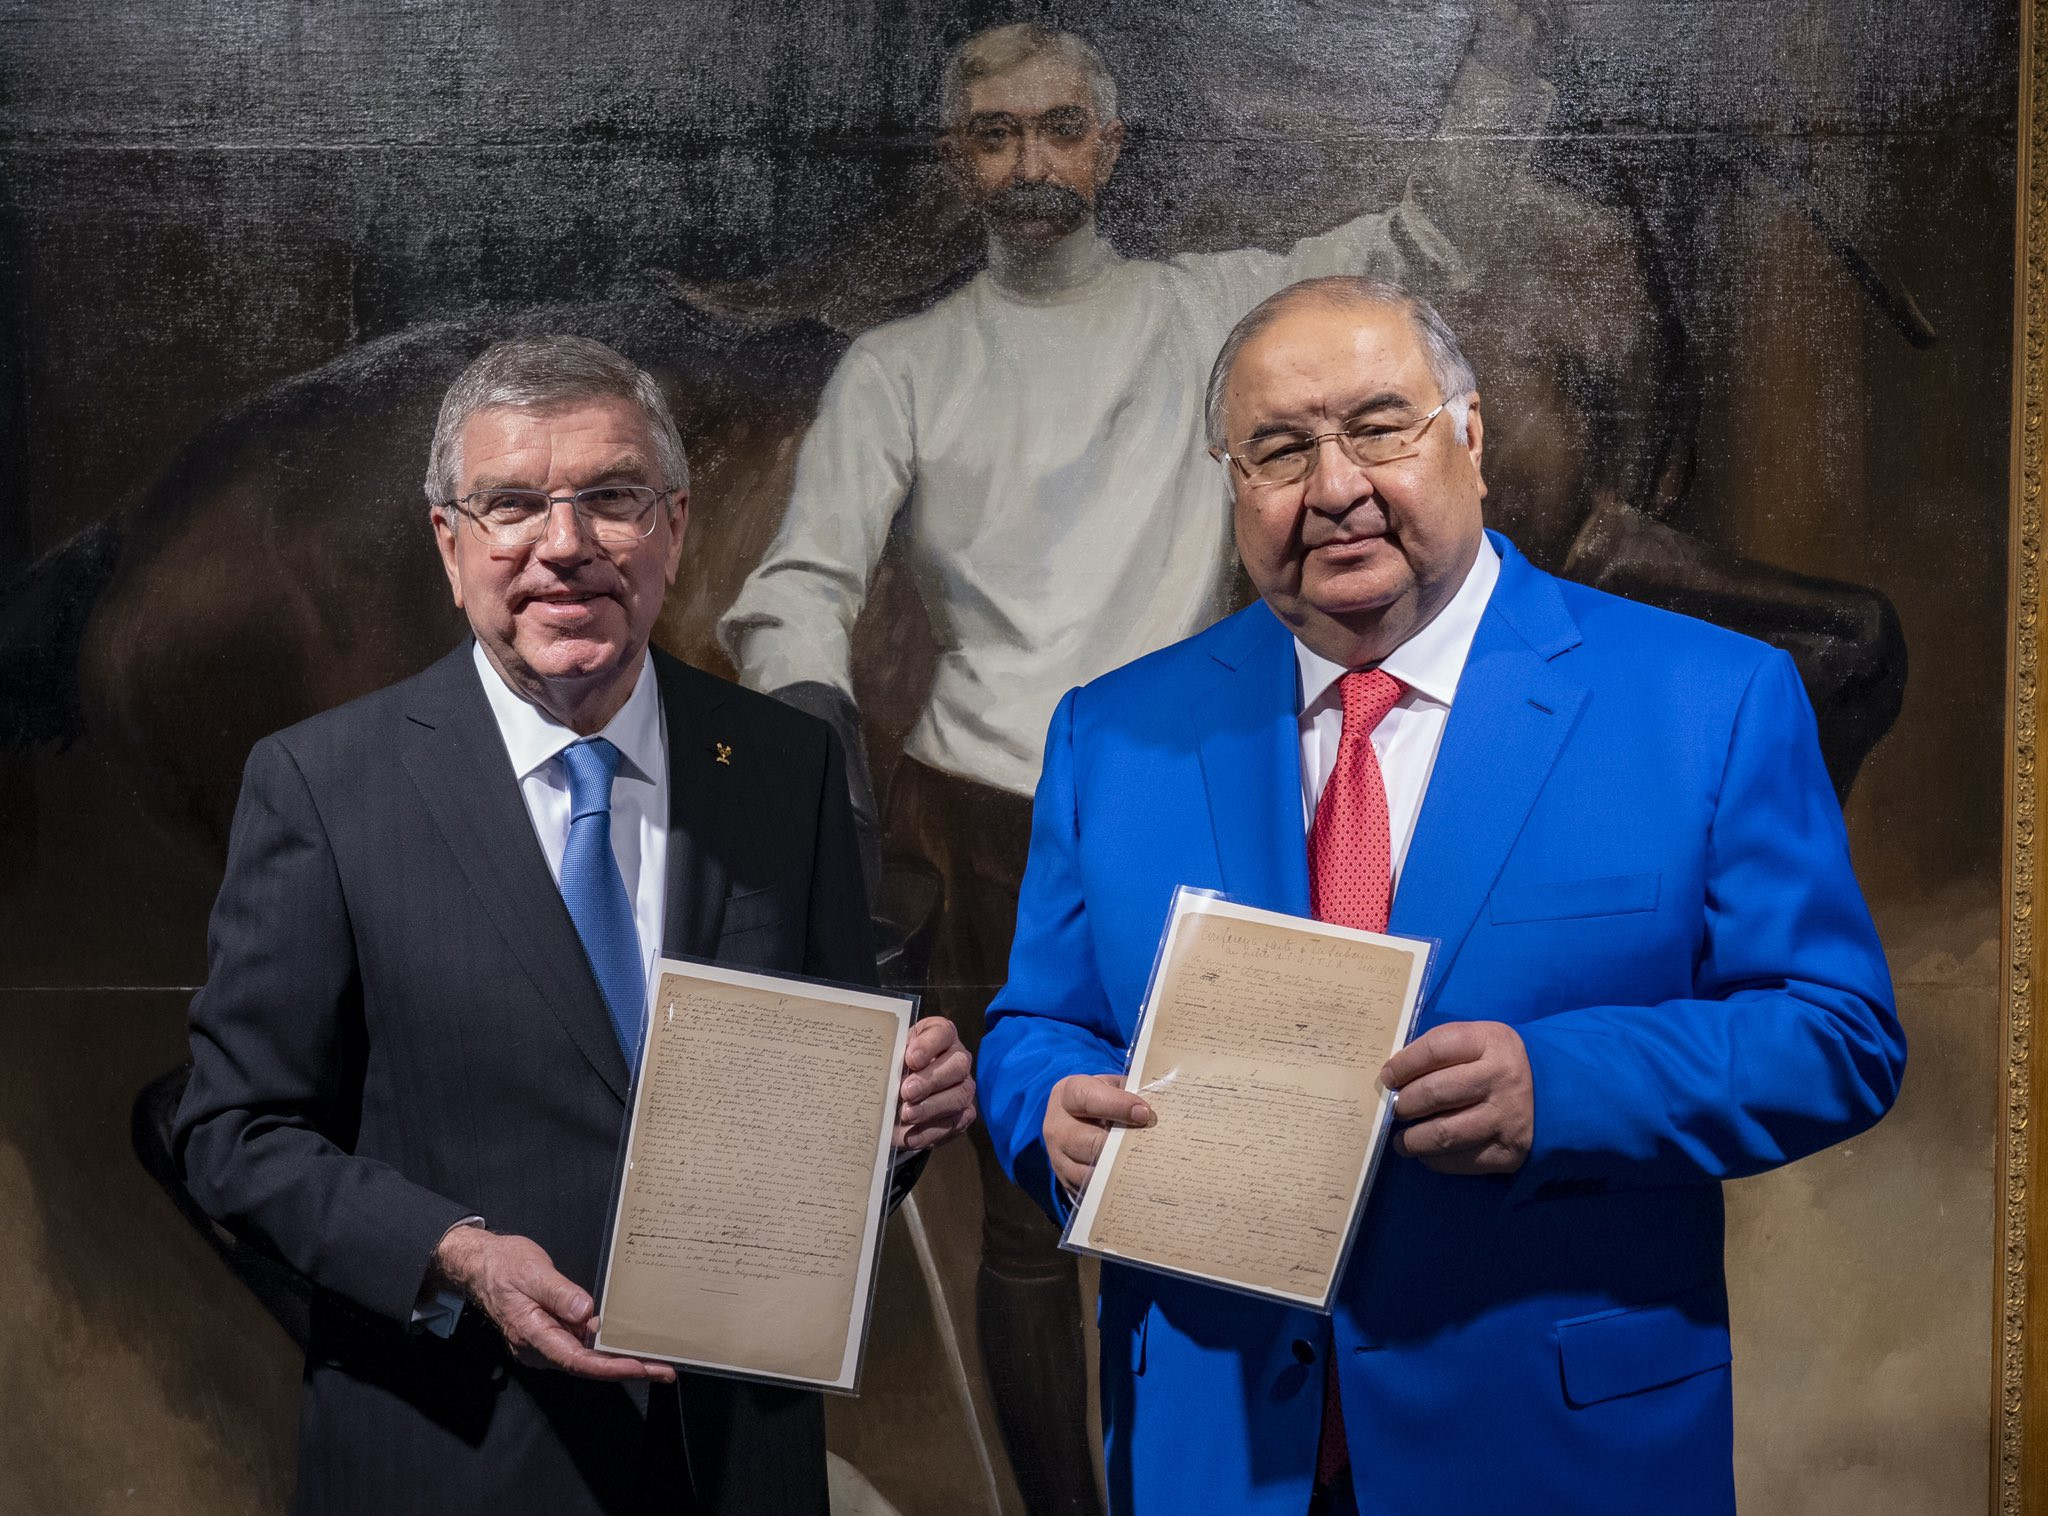 Thomas Bach, left, received the manuscript from Alisher Usmanov ©IOC